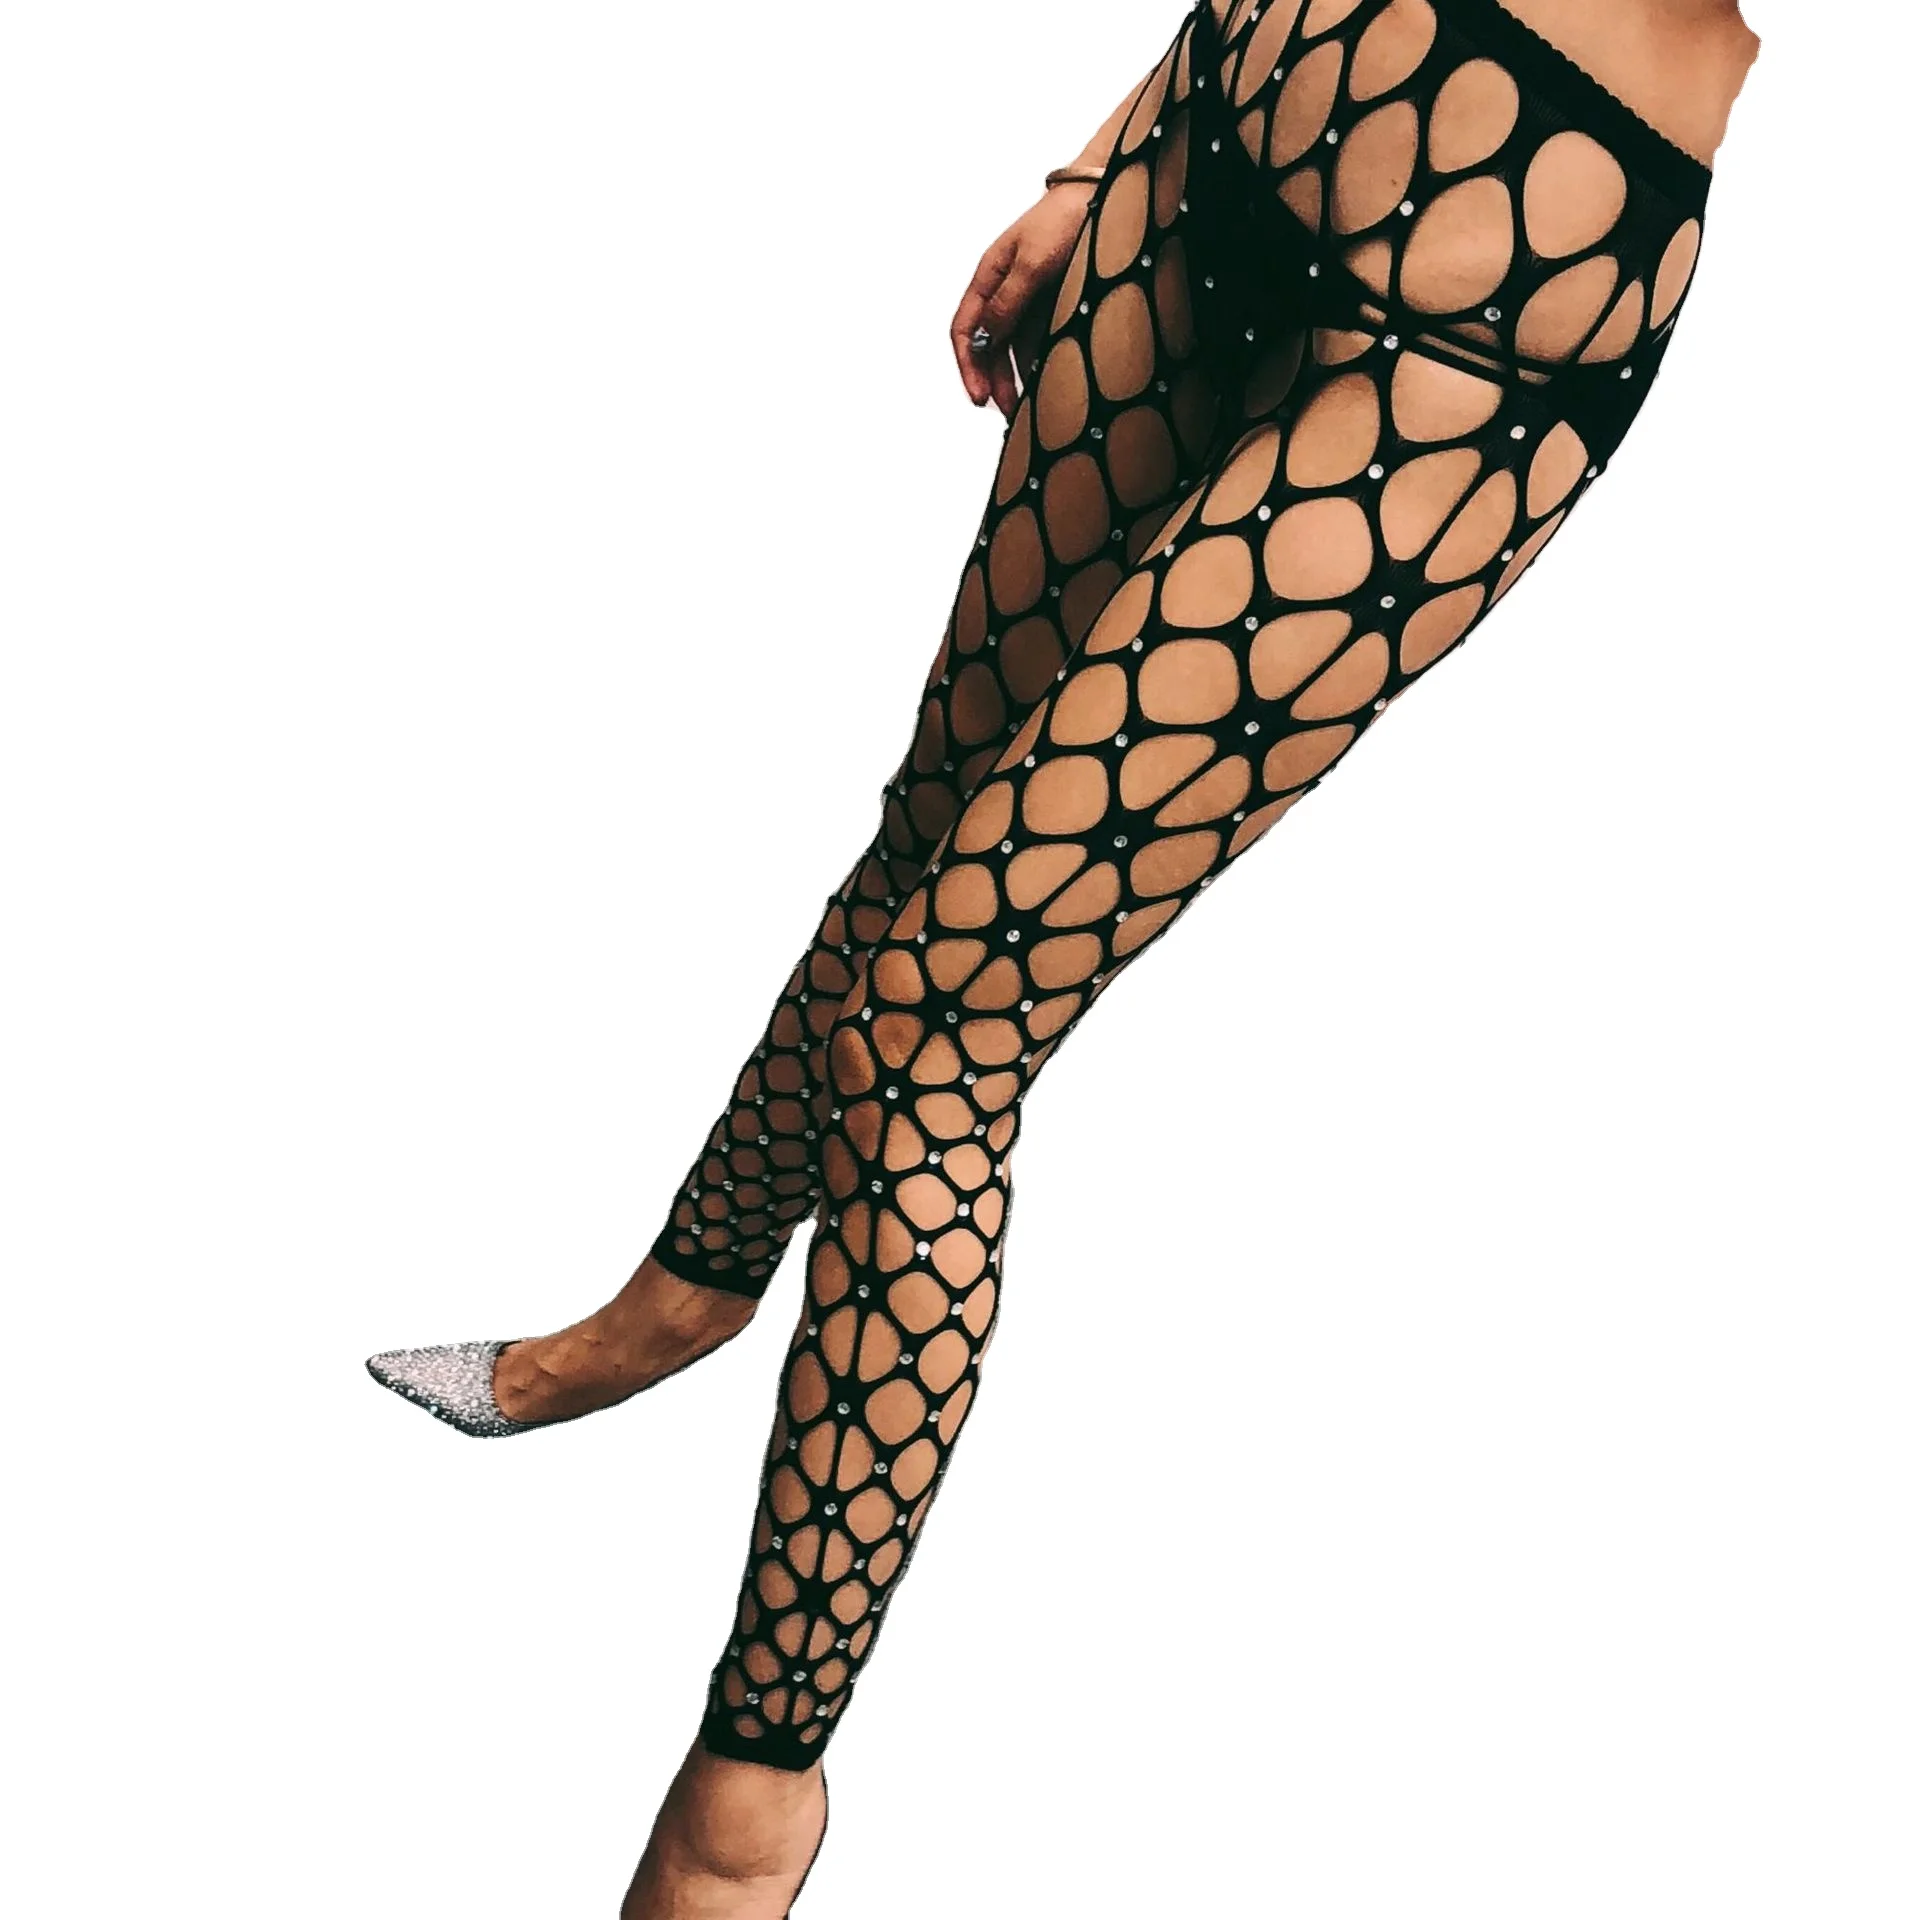 

New Style Sexy Woman Crystal Glitter Up Thigh High Stockings Rhinestone fishnet pantyhose Diamond Large grid Tights, Colors